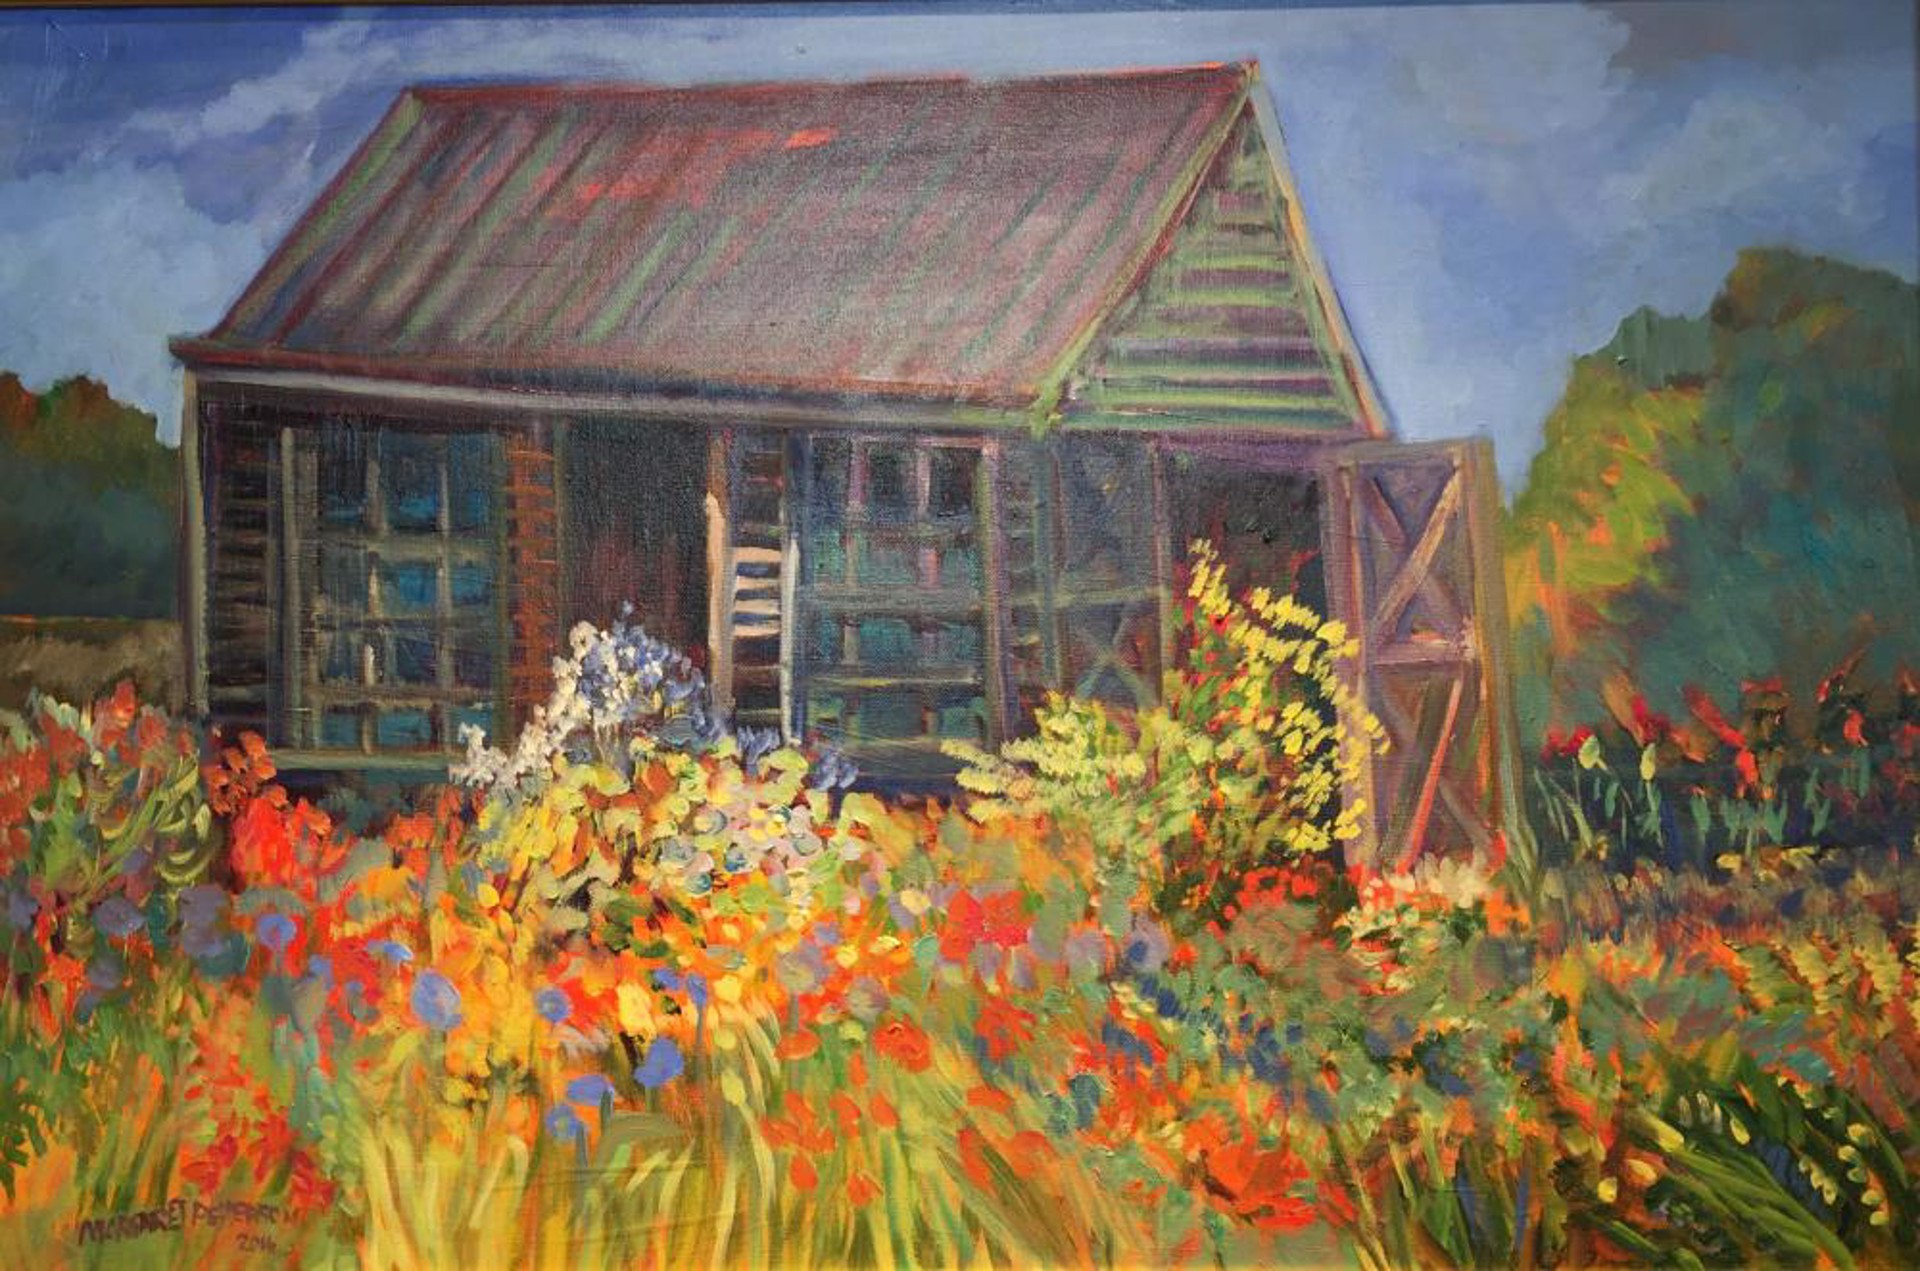 The Green Barn by Margaret Petterson